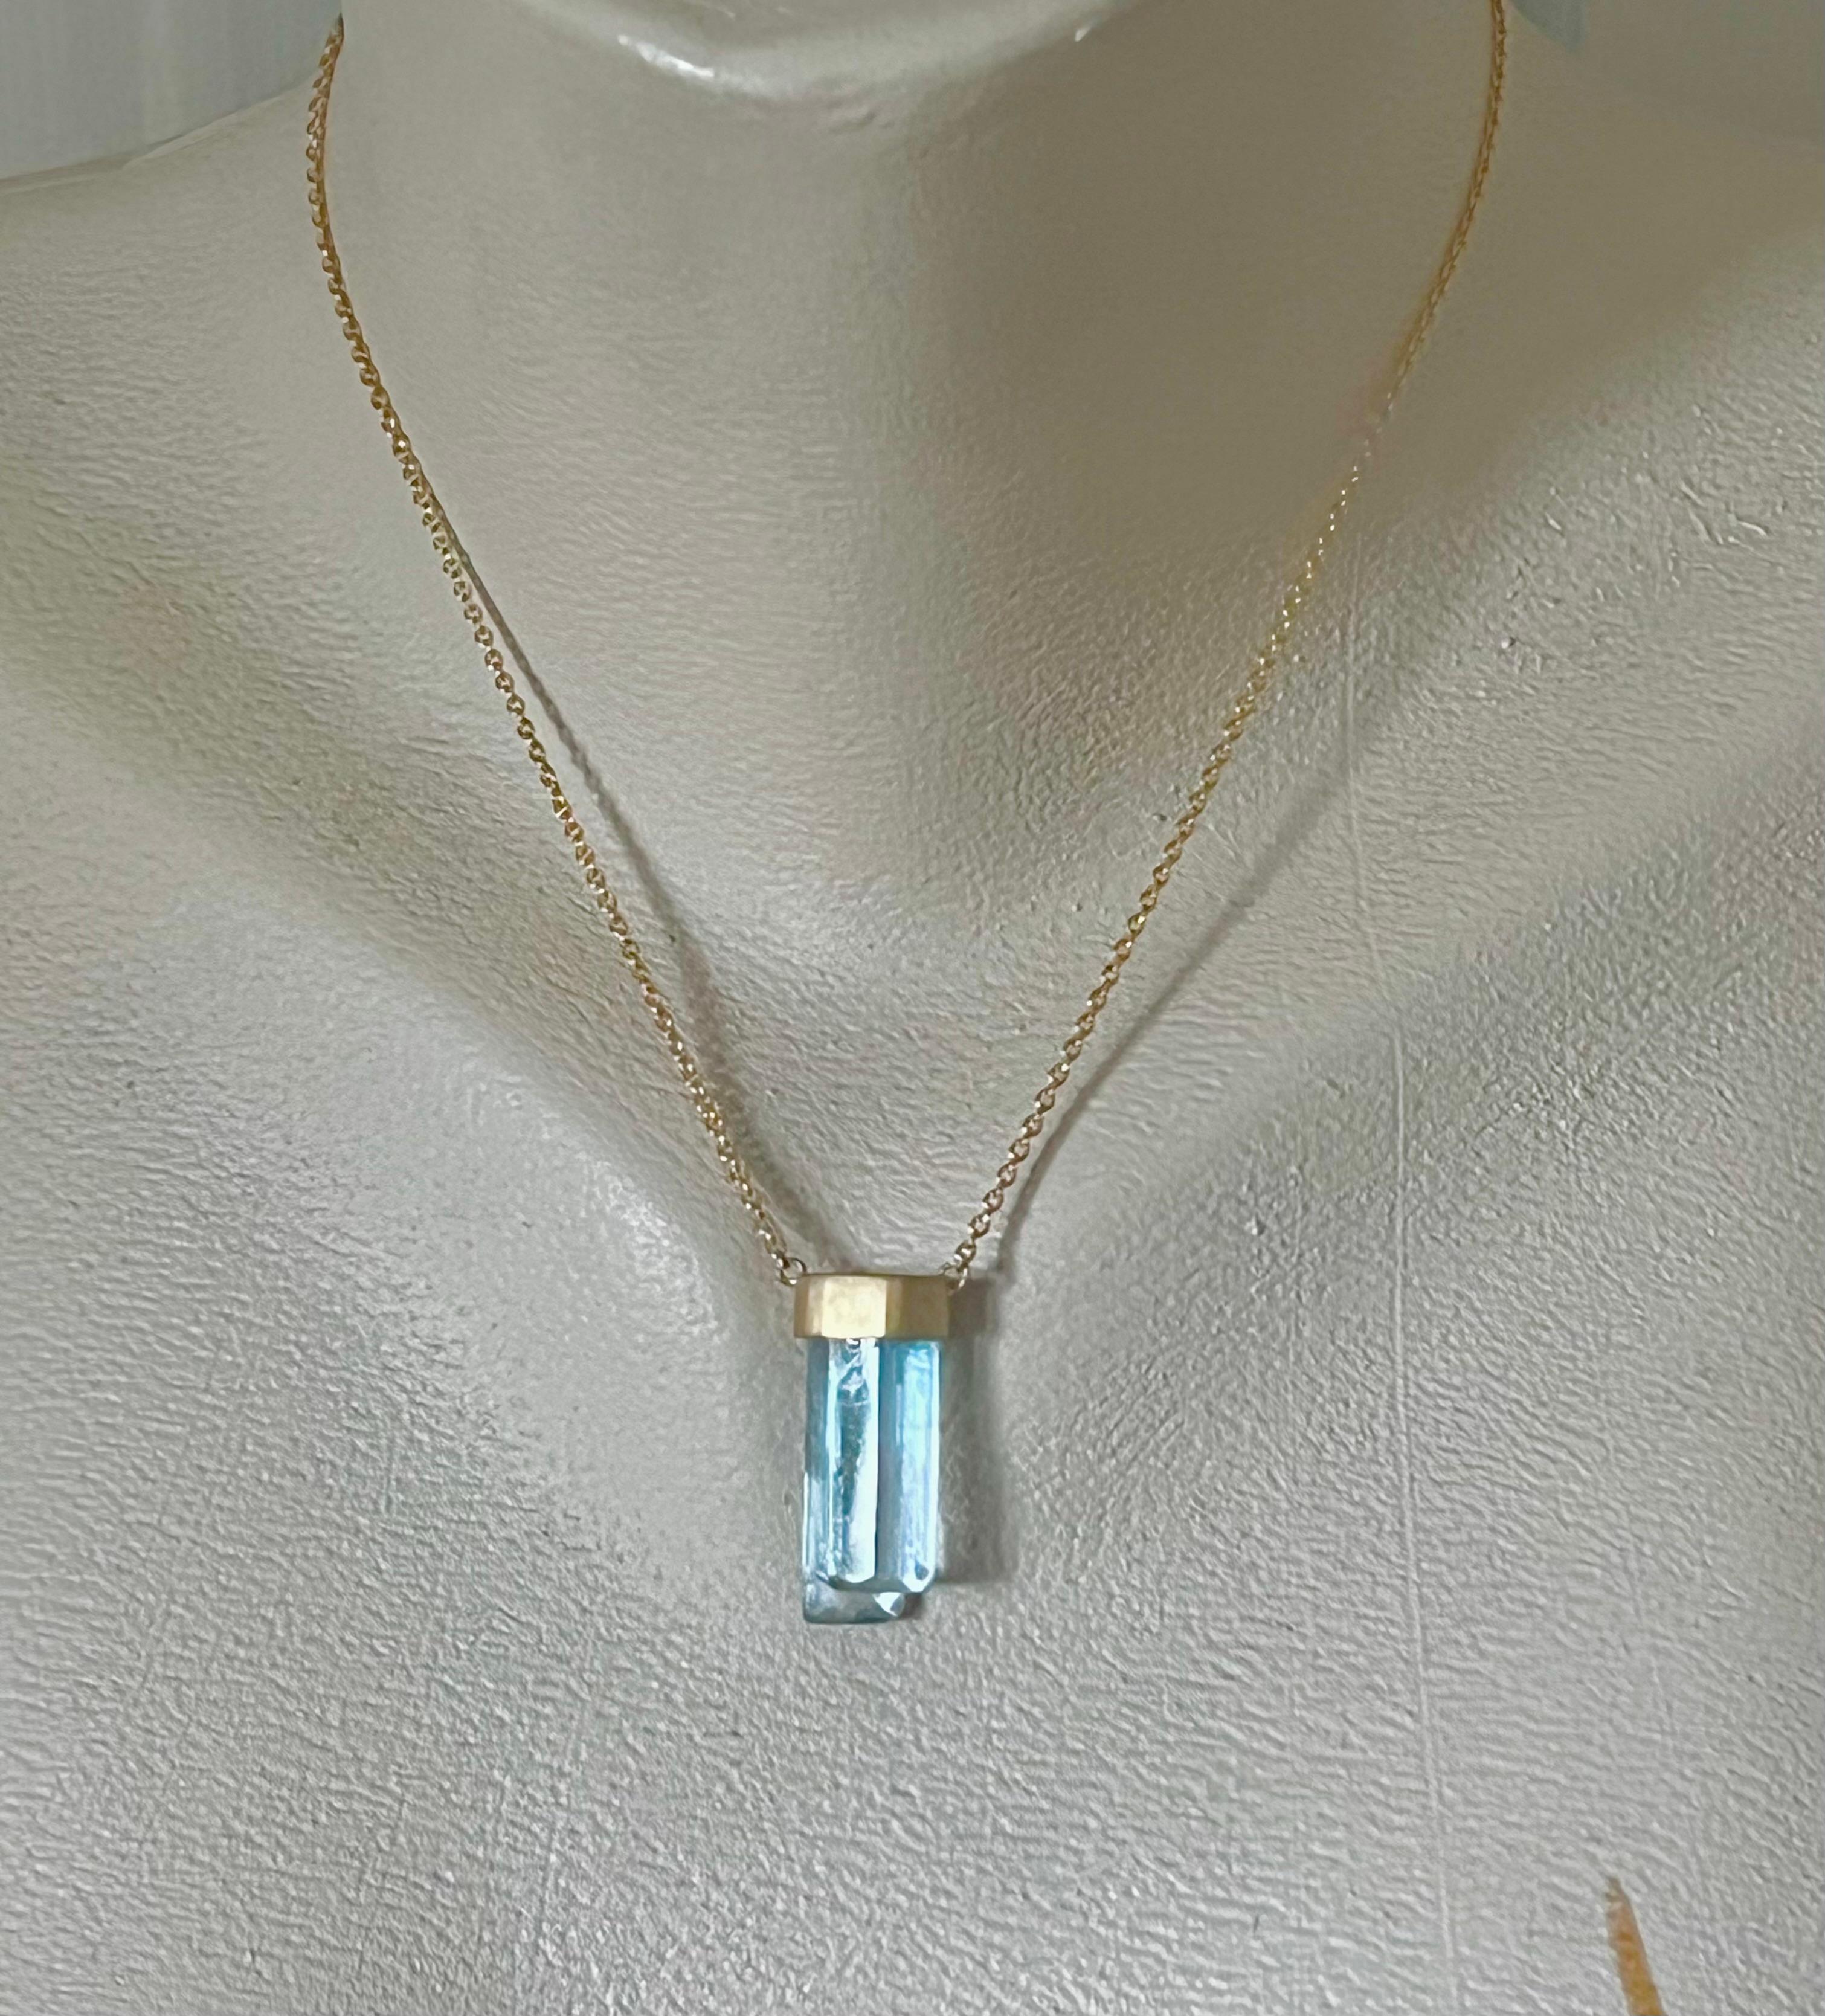 This handmade piece is a one of a kind, made with 26 CT’s of natural Afghani Aquamarine crystal and solid 18k yellow gold. This is a powerful piece, made with intention for manifesting your desires of your heart. If you’re new to energy work then